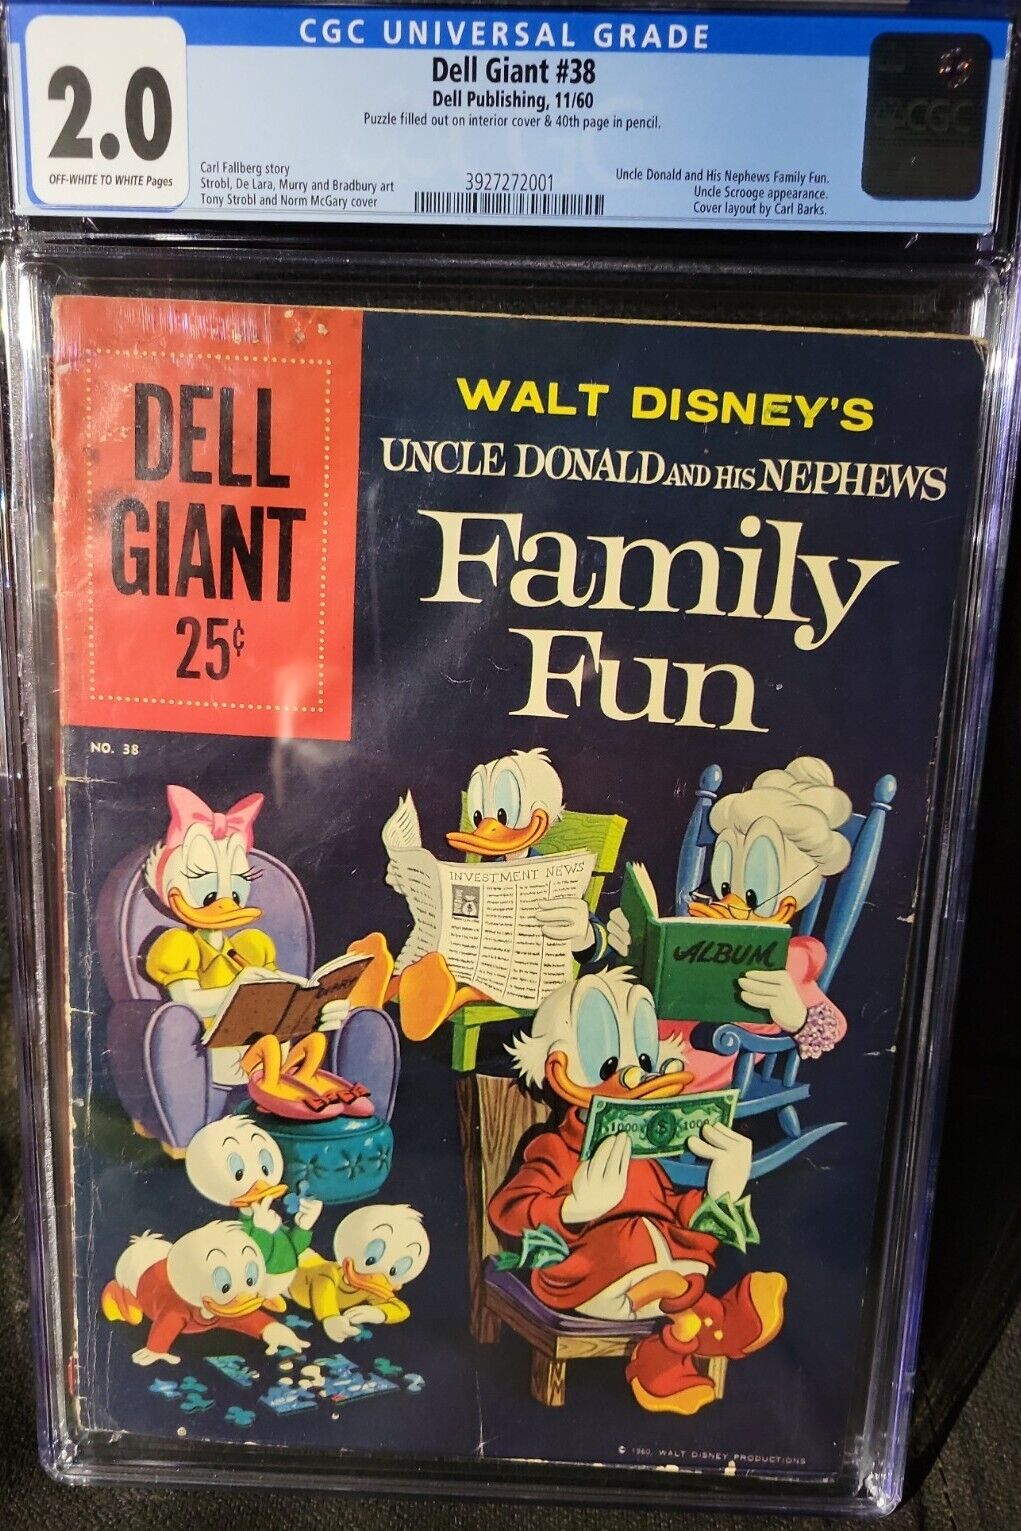 1960 Dell Giant #38 - Donald Duck Family Fun - Barks cover layout  - CGC 2.0